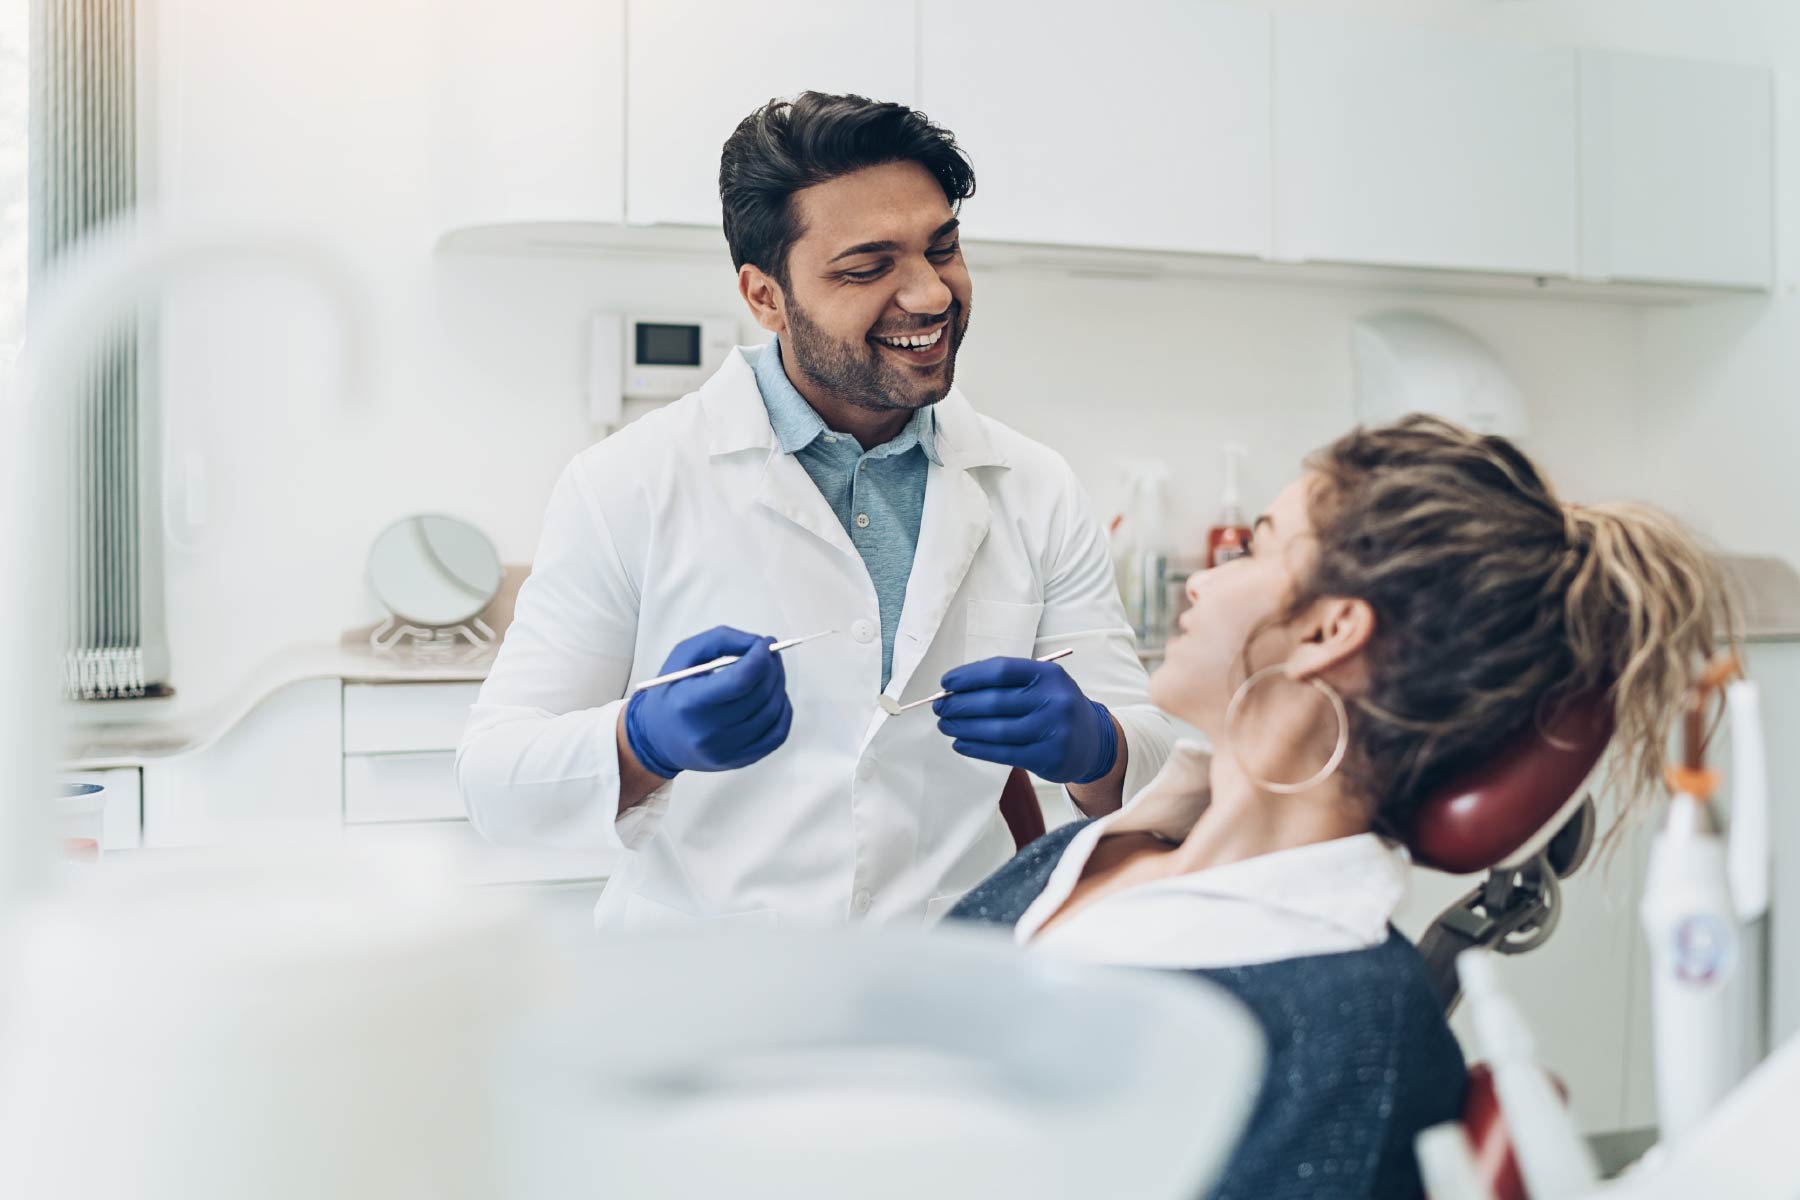 Dentist talking to patient during check-up